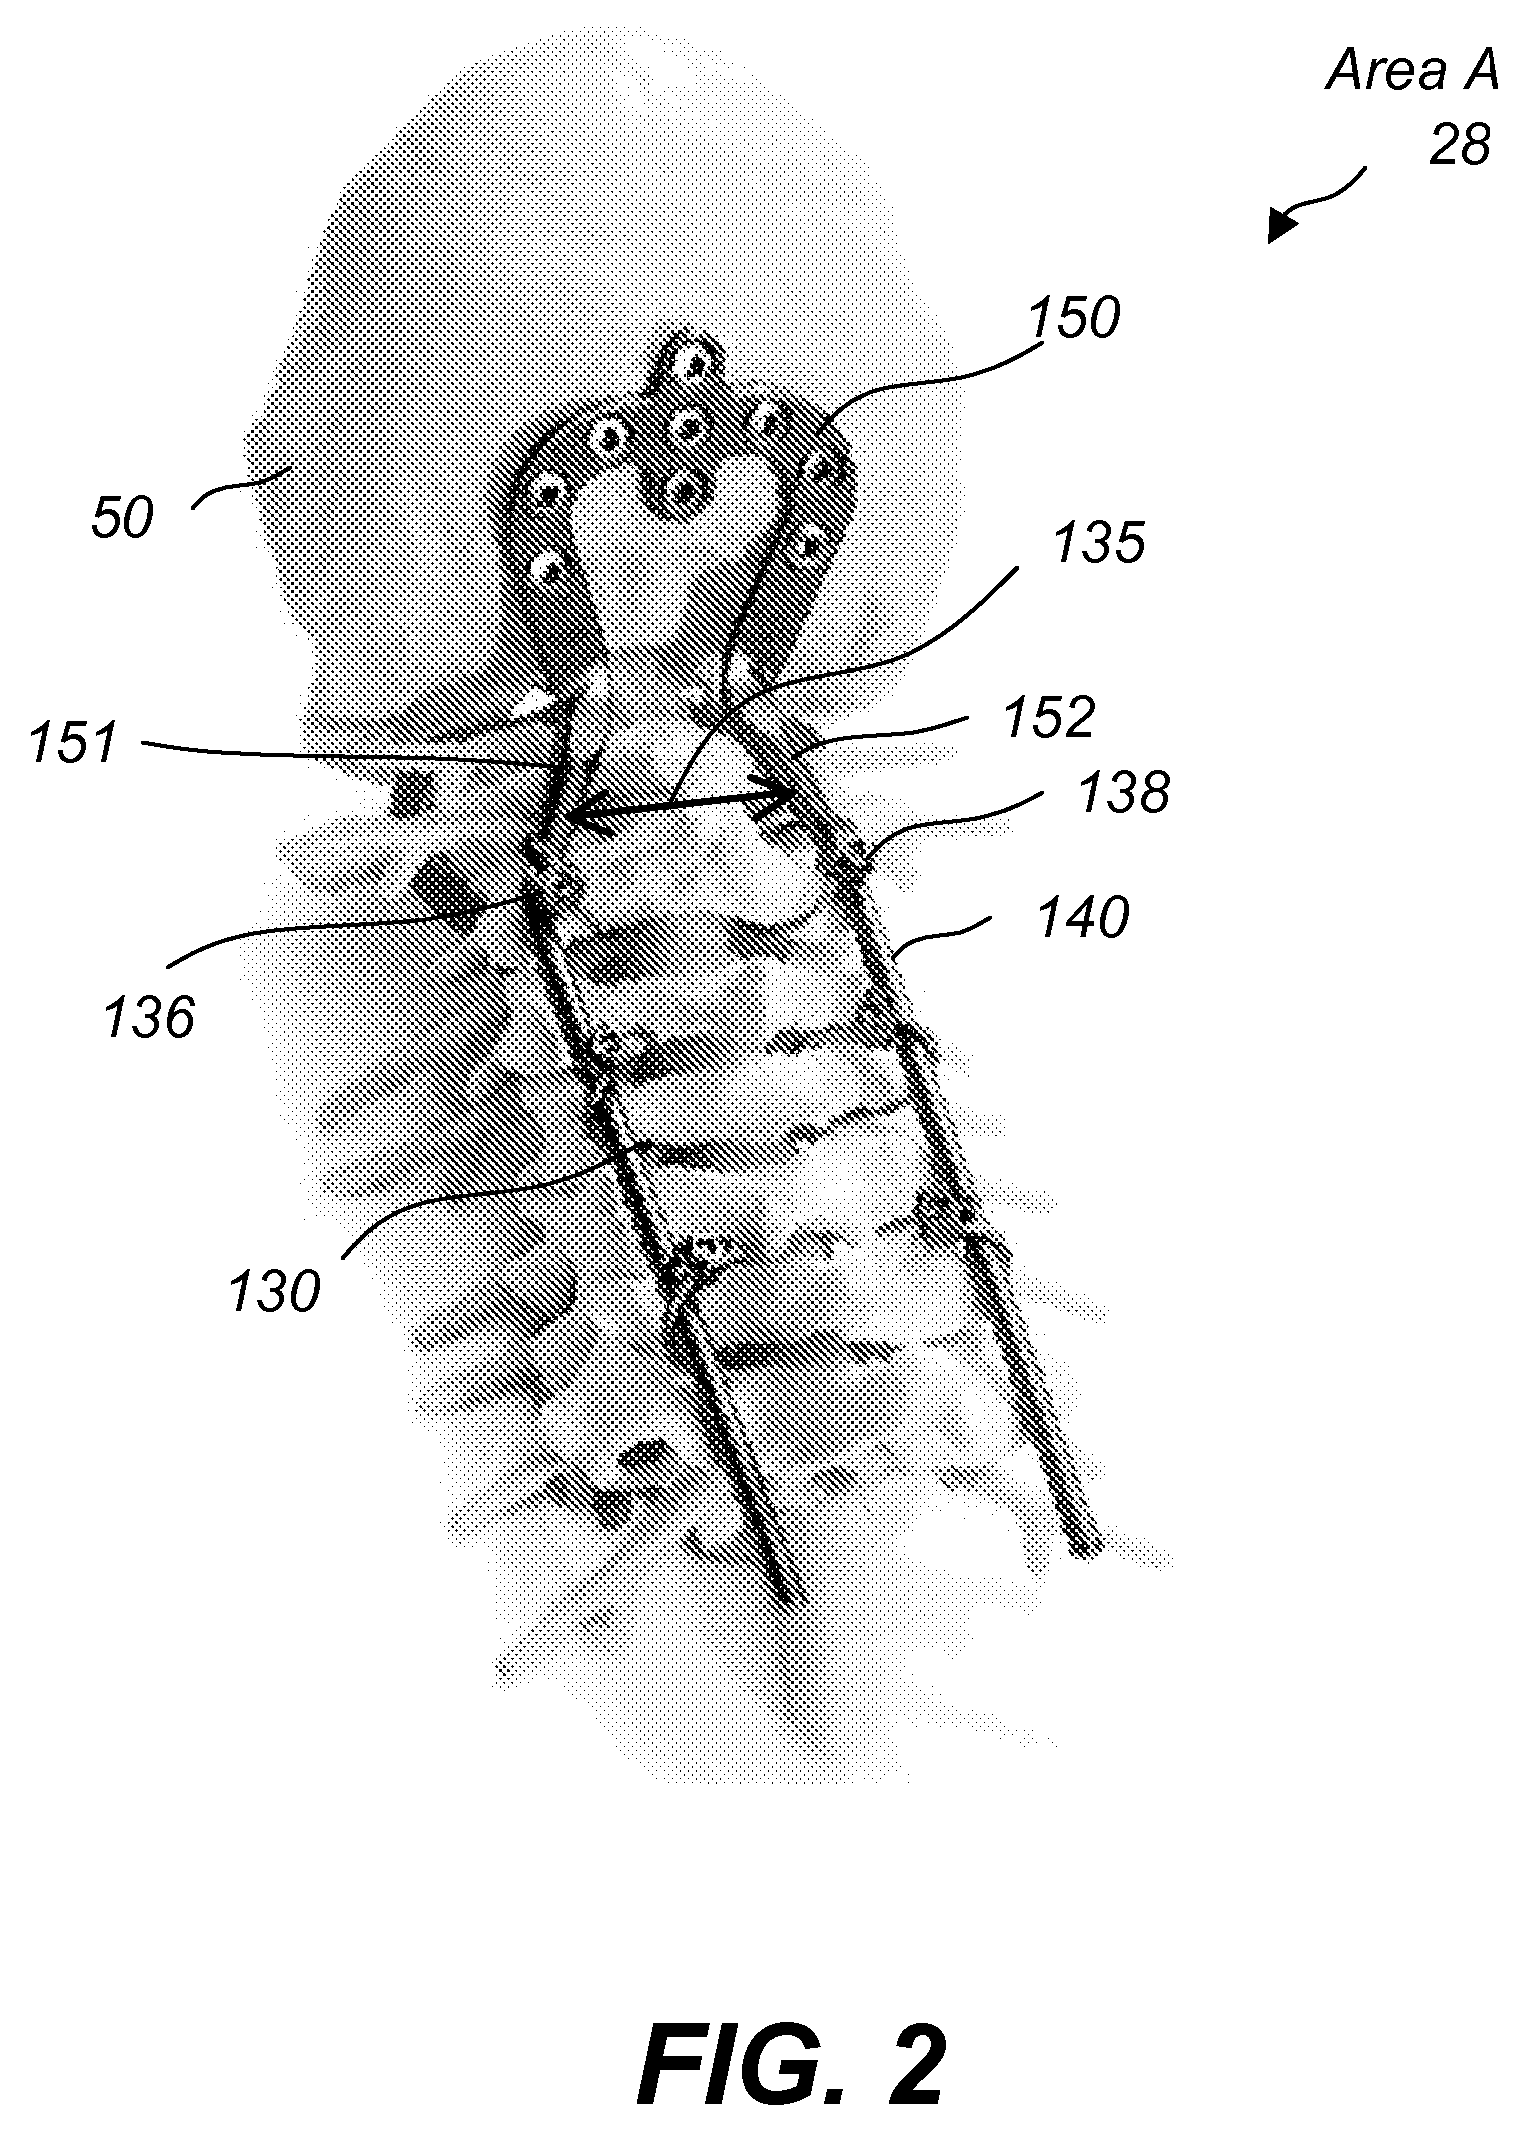 Apparatus and method for spine fixation